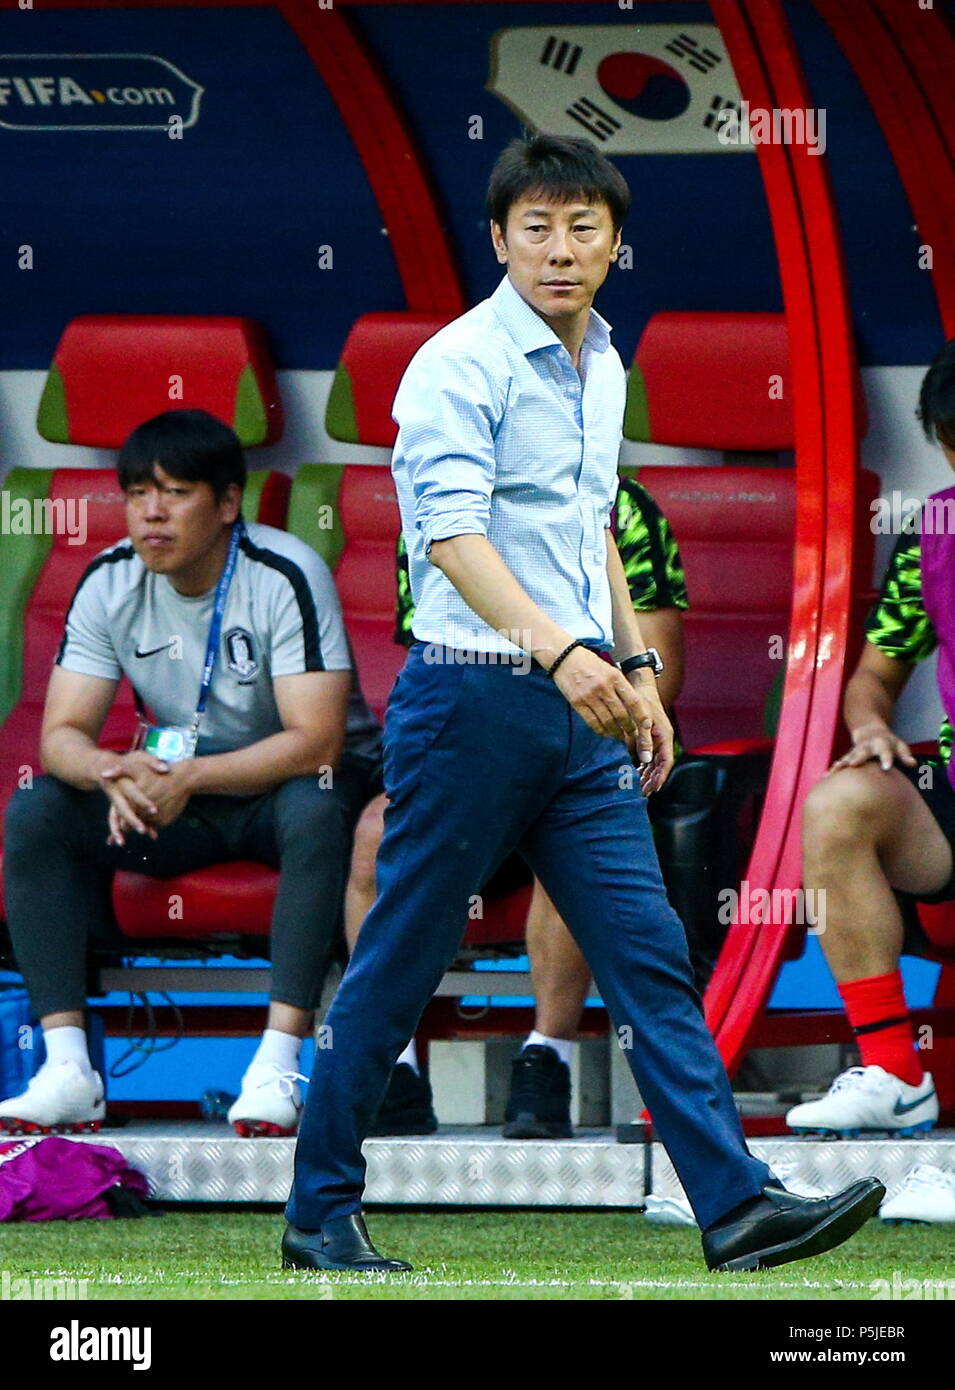 Kazan Russia 27th June 2018 Head Coach Shin Tae Yong Of The South Korean Team In Their 2018 Fifa World Cup Group F Match Against Germany At Kazan Arena Stadium Yegor Aleyev Tass Credit